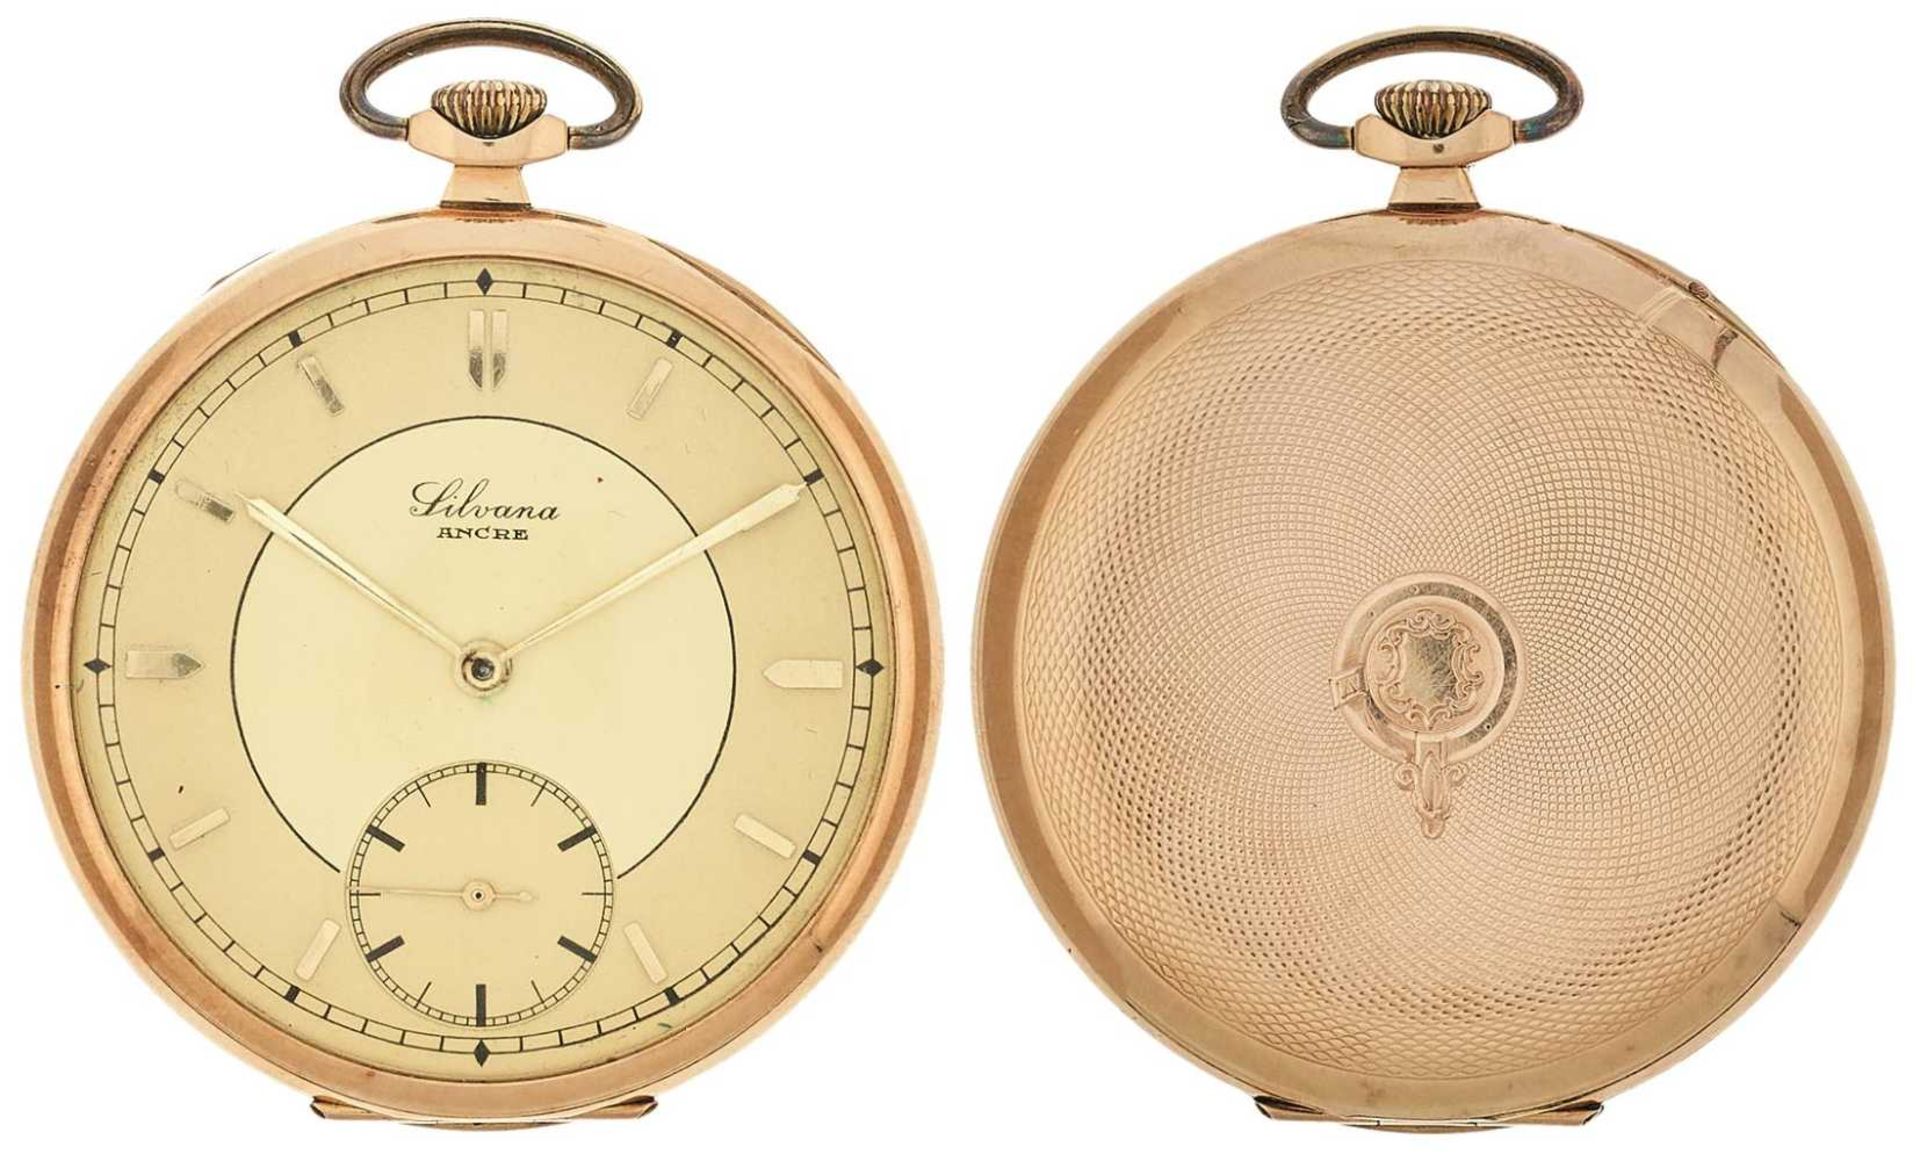 Silvana Ancre pocket-watch. Ca. 49 mm, 585er yellow gold, manual wind. Golden dial with golden index